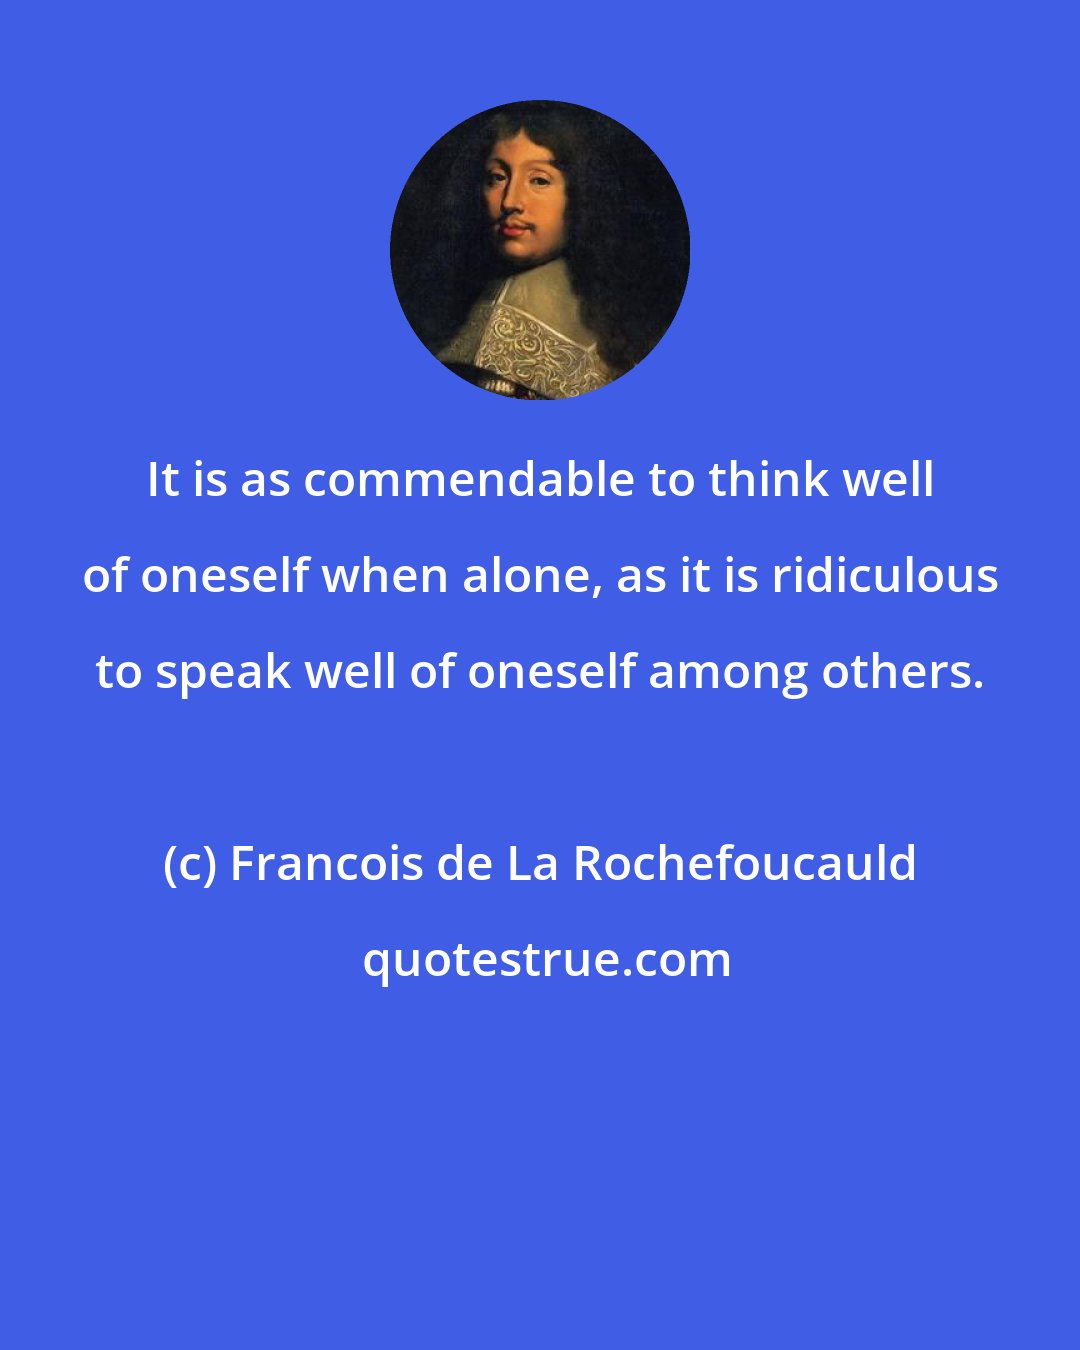 Francois de La Rochefoucauld: It is as commendable to think well of oneself when alone, as it is ridiculous to speak well of oneself among others.